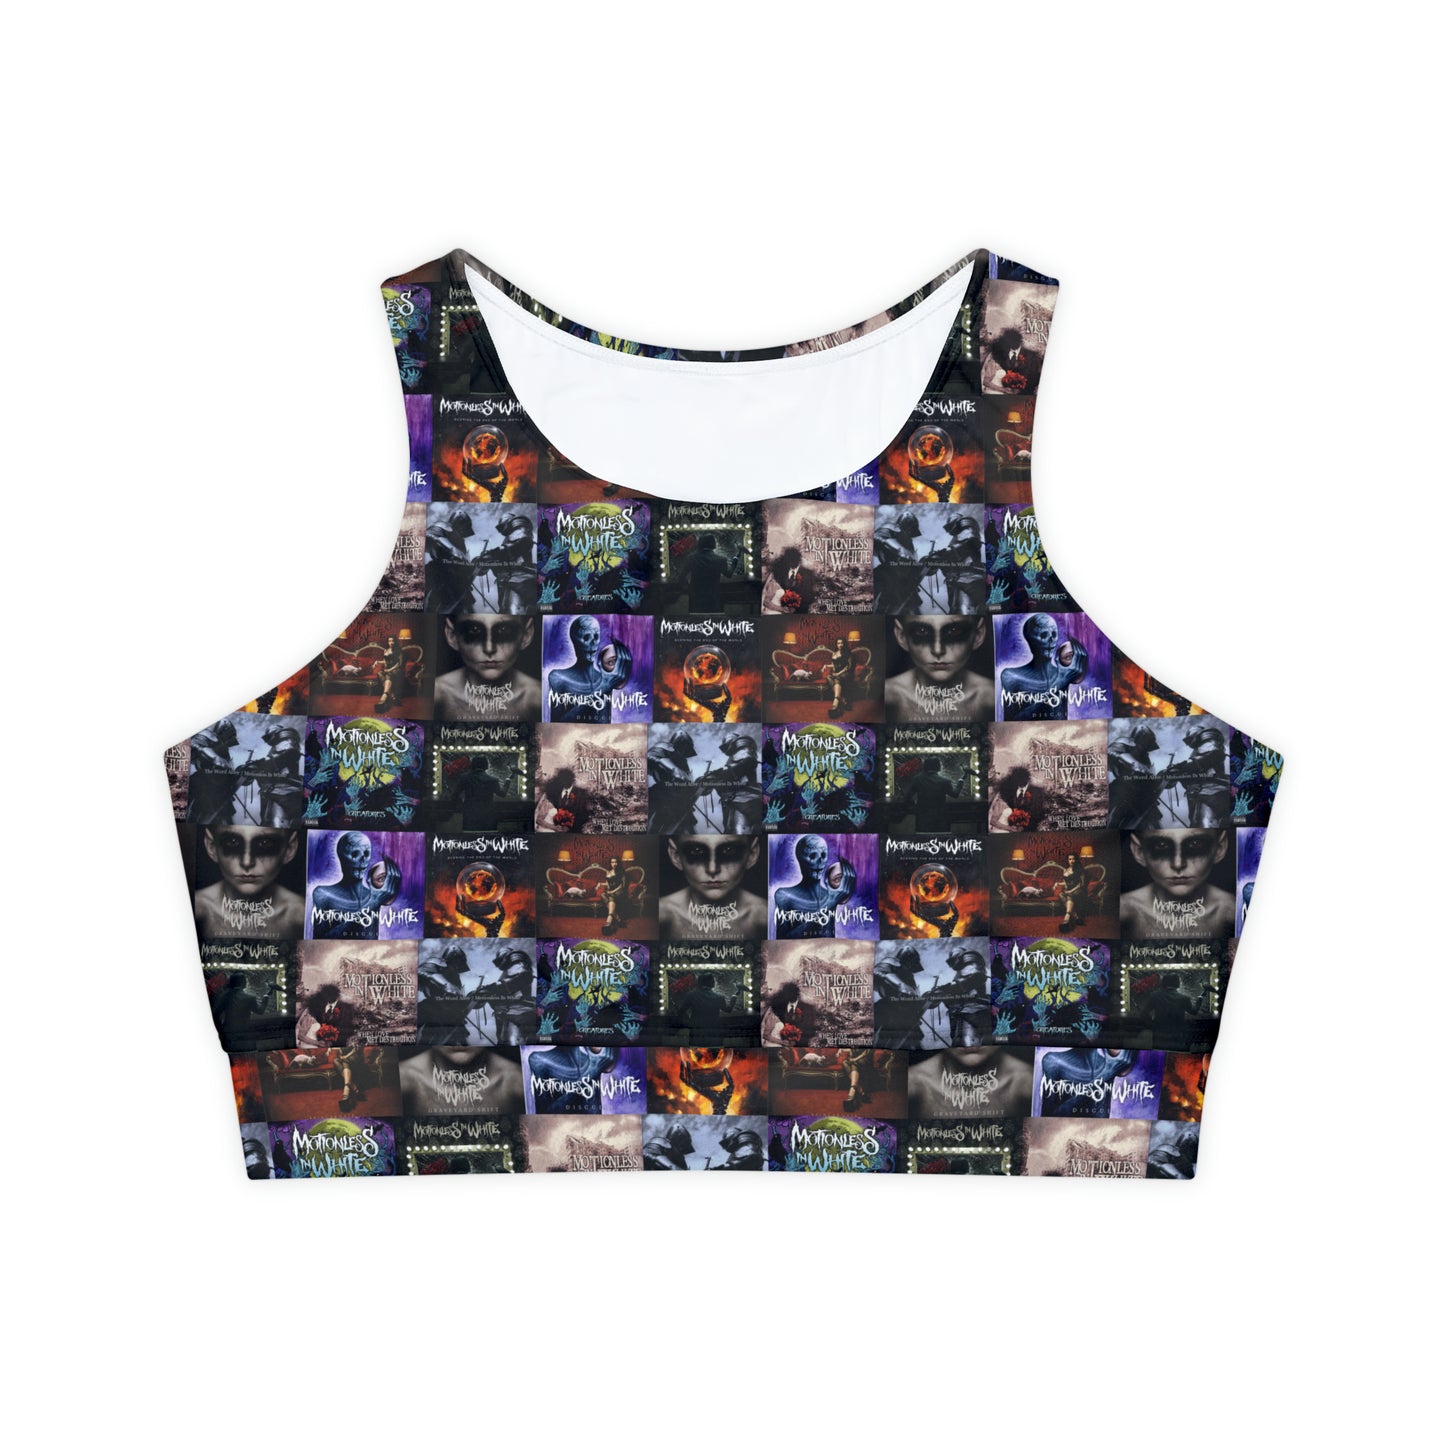 Motionless In White Album Cover Collage Fully Lined Padded Sports Bra